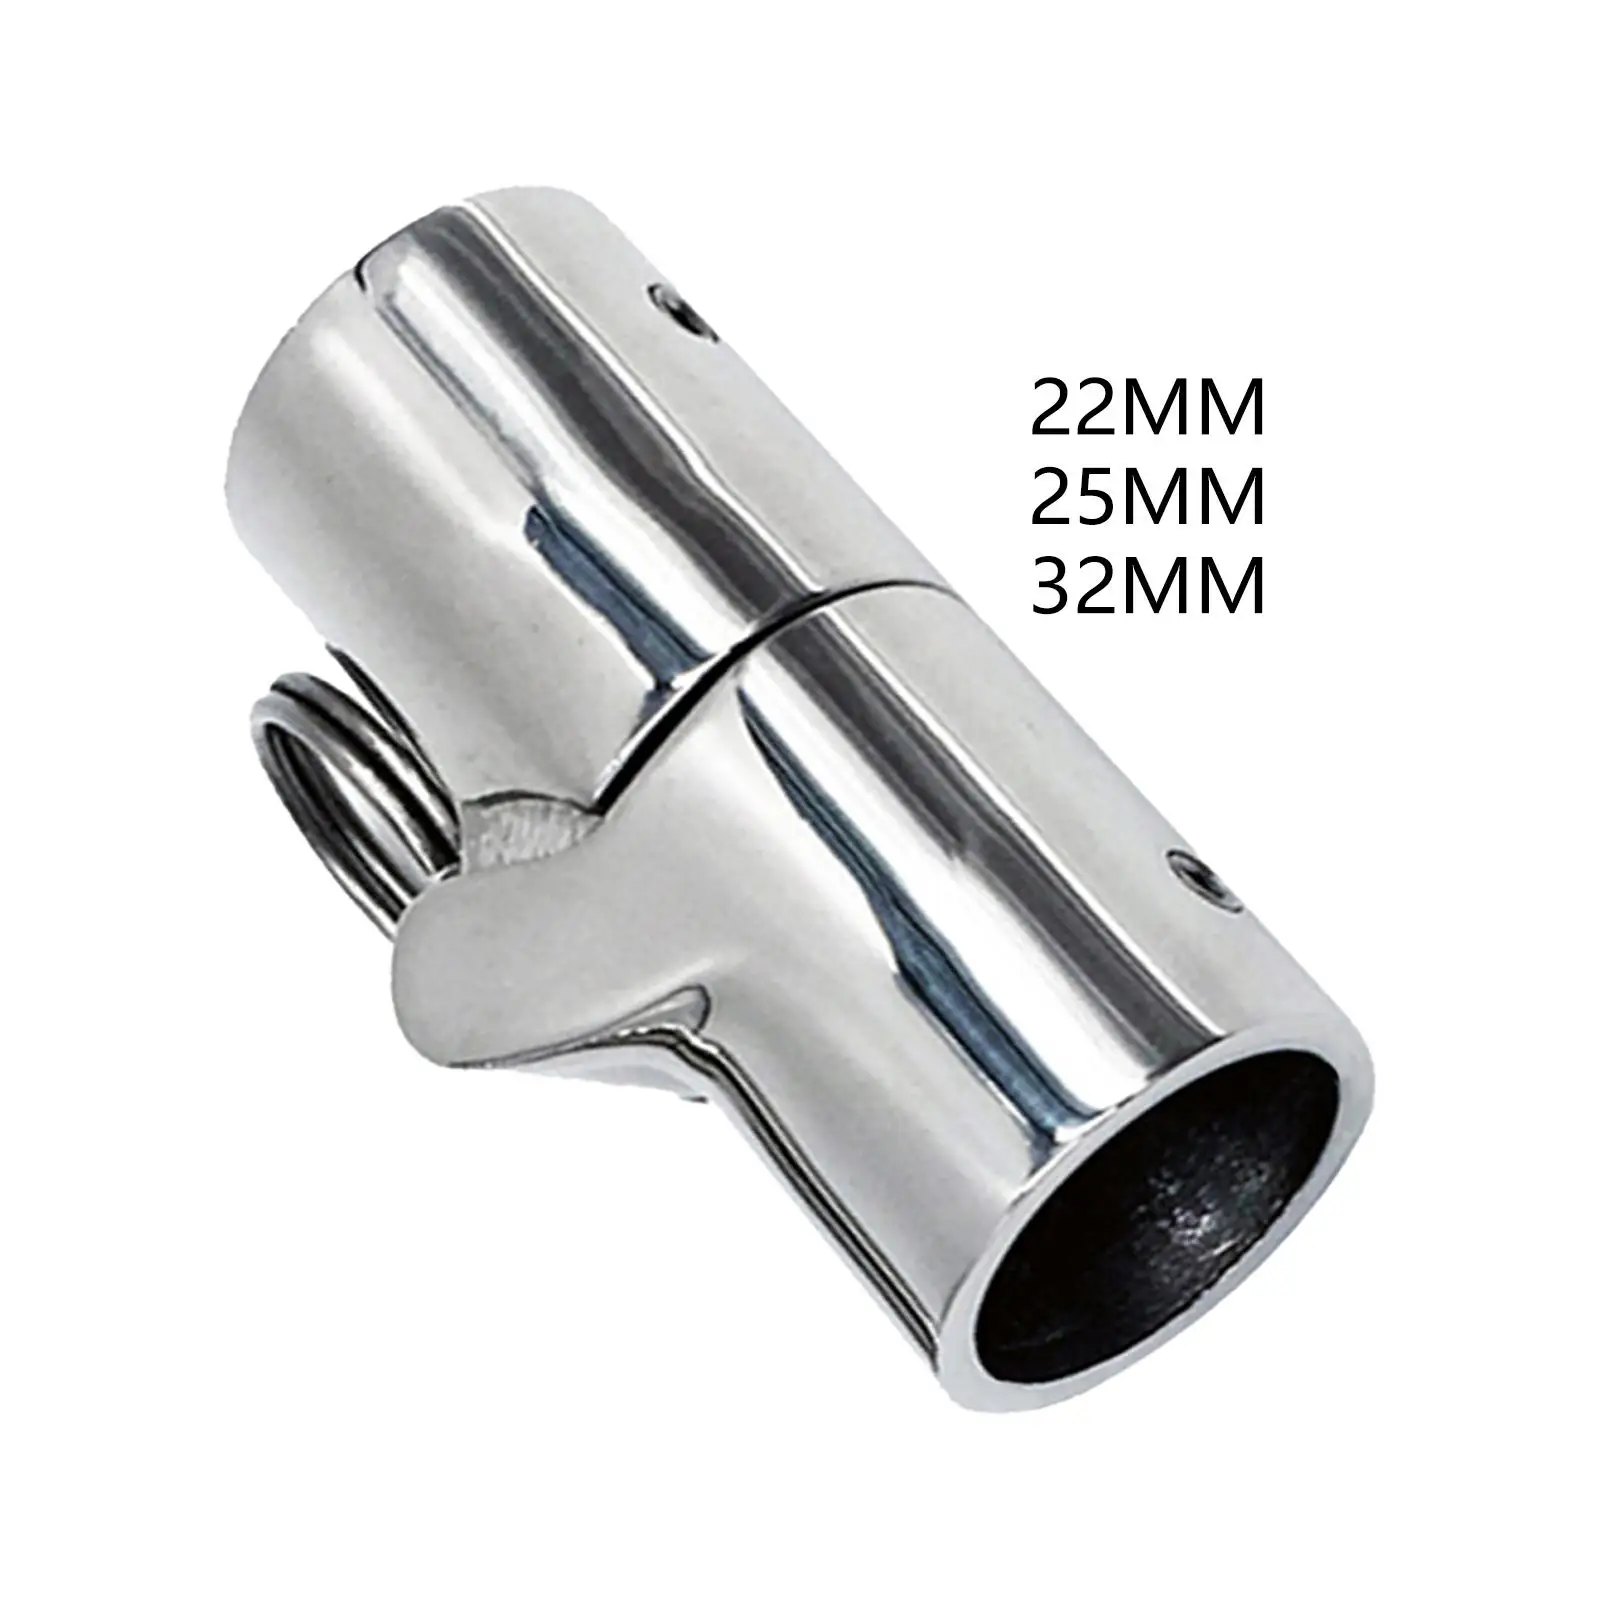 Marine Stainless Steel Folding Swivel Coupling Tube Pipe Connector Boat Deck Hinge Mount Connector Boat Hardware Fitting